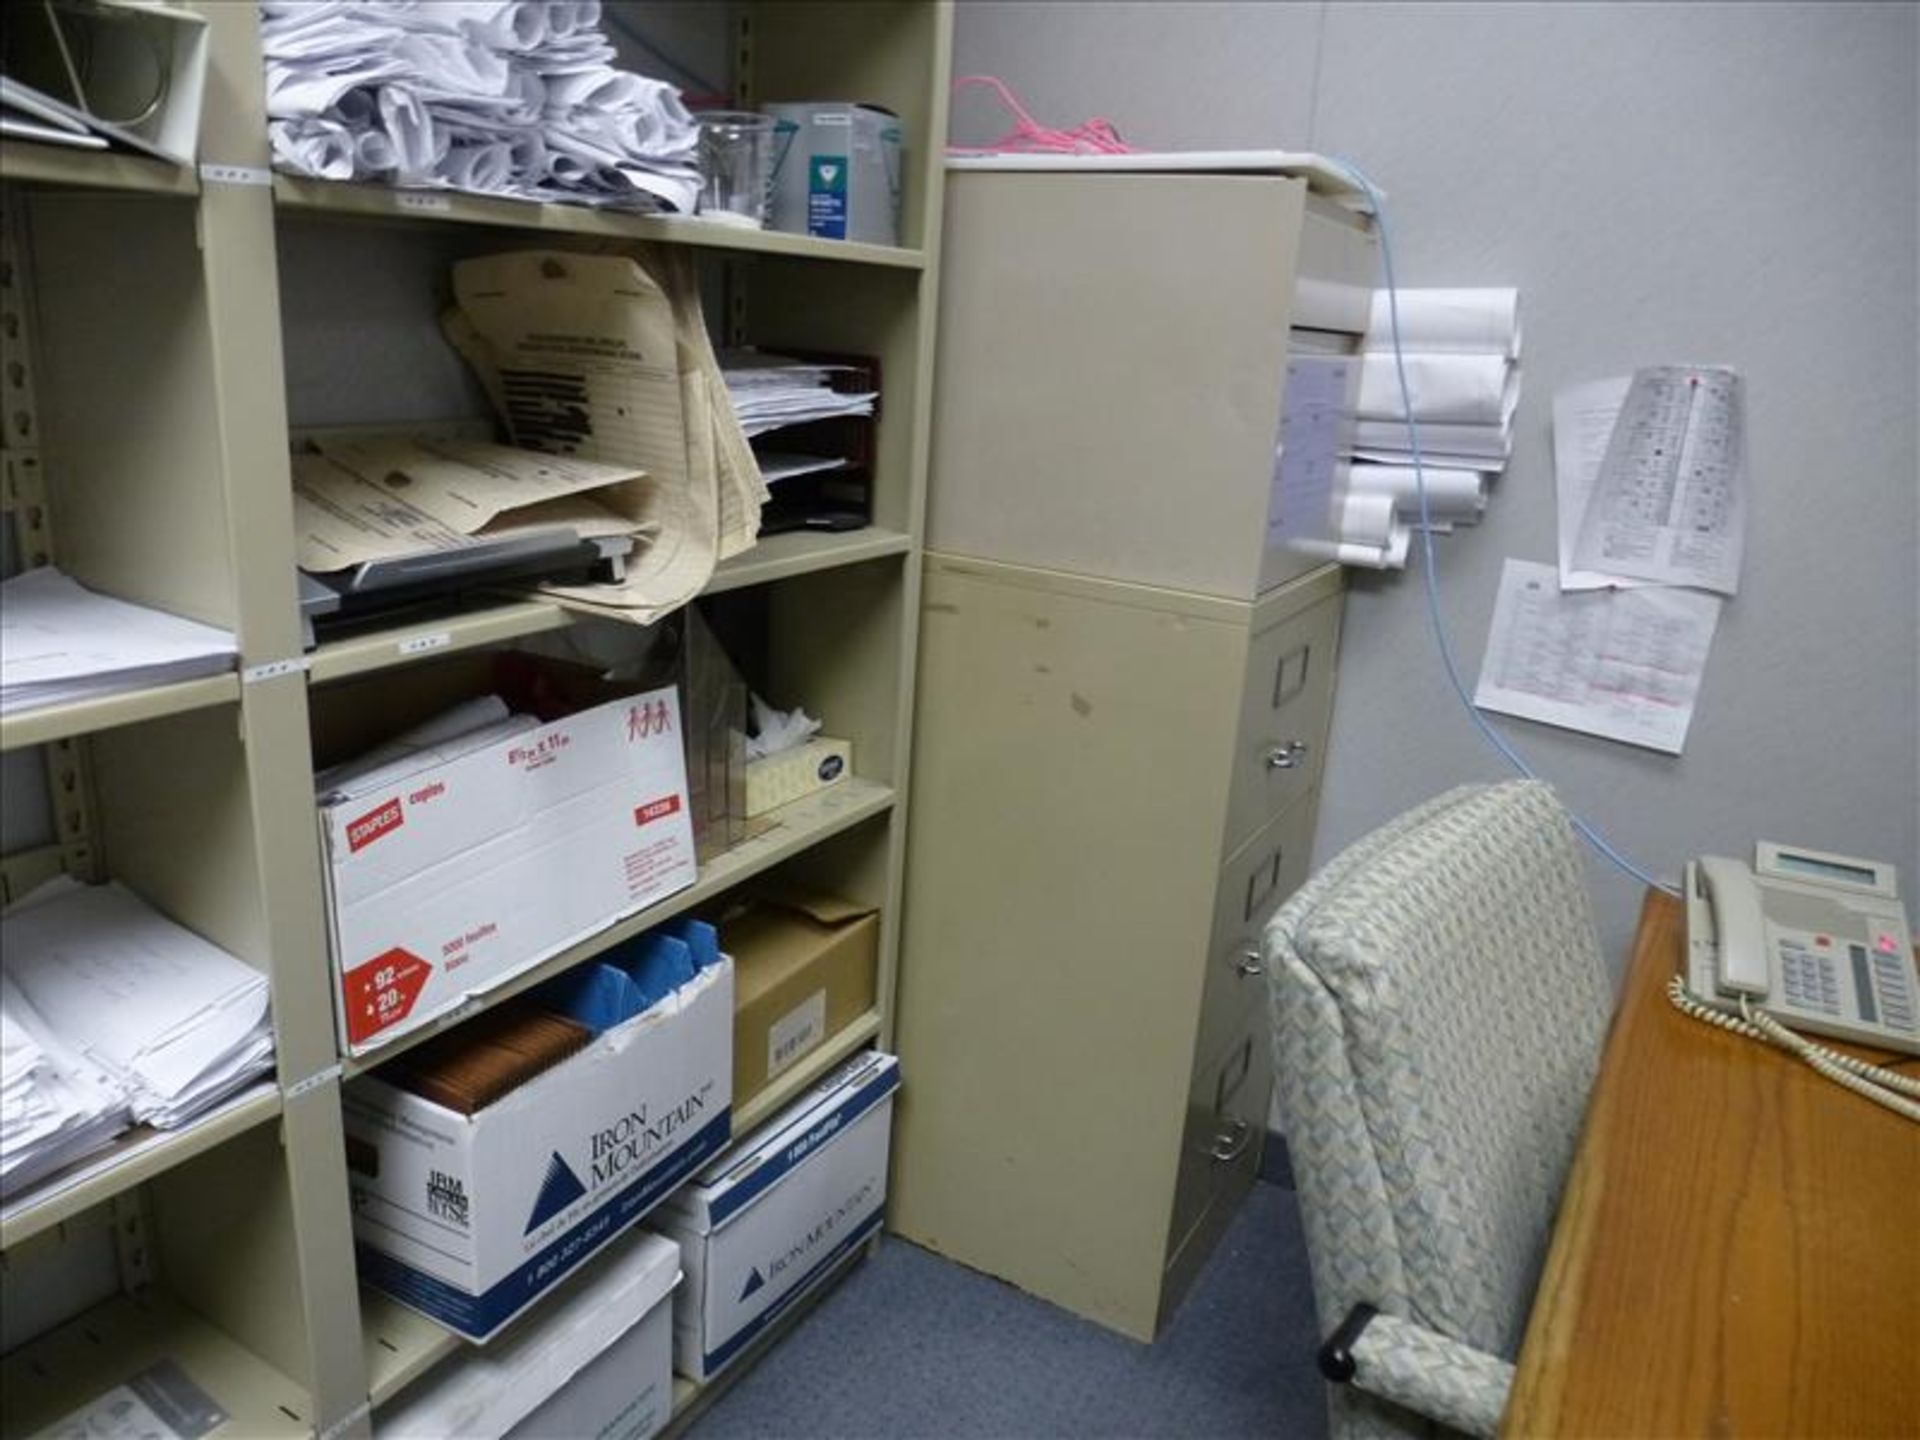 Office No. 27 (next to Office No. 28) - office furniture contents only (located at 150 Bartor Rd - Image 2 of 4